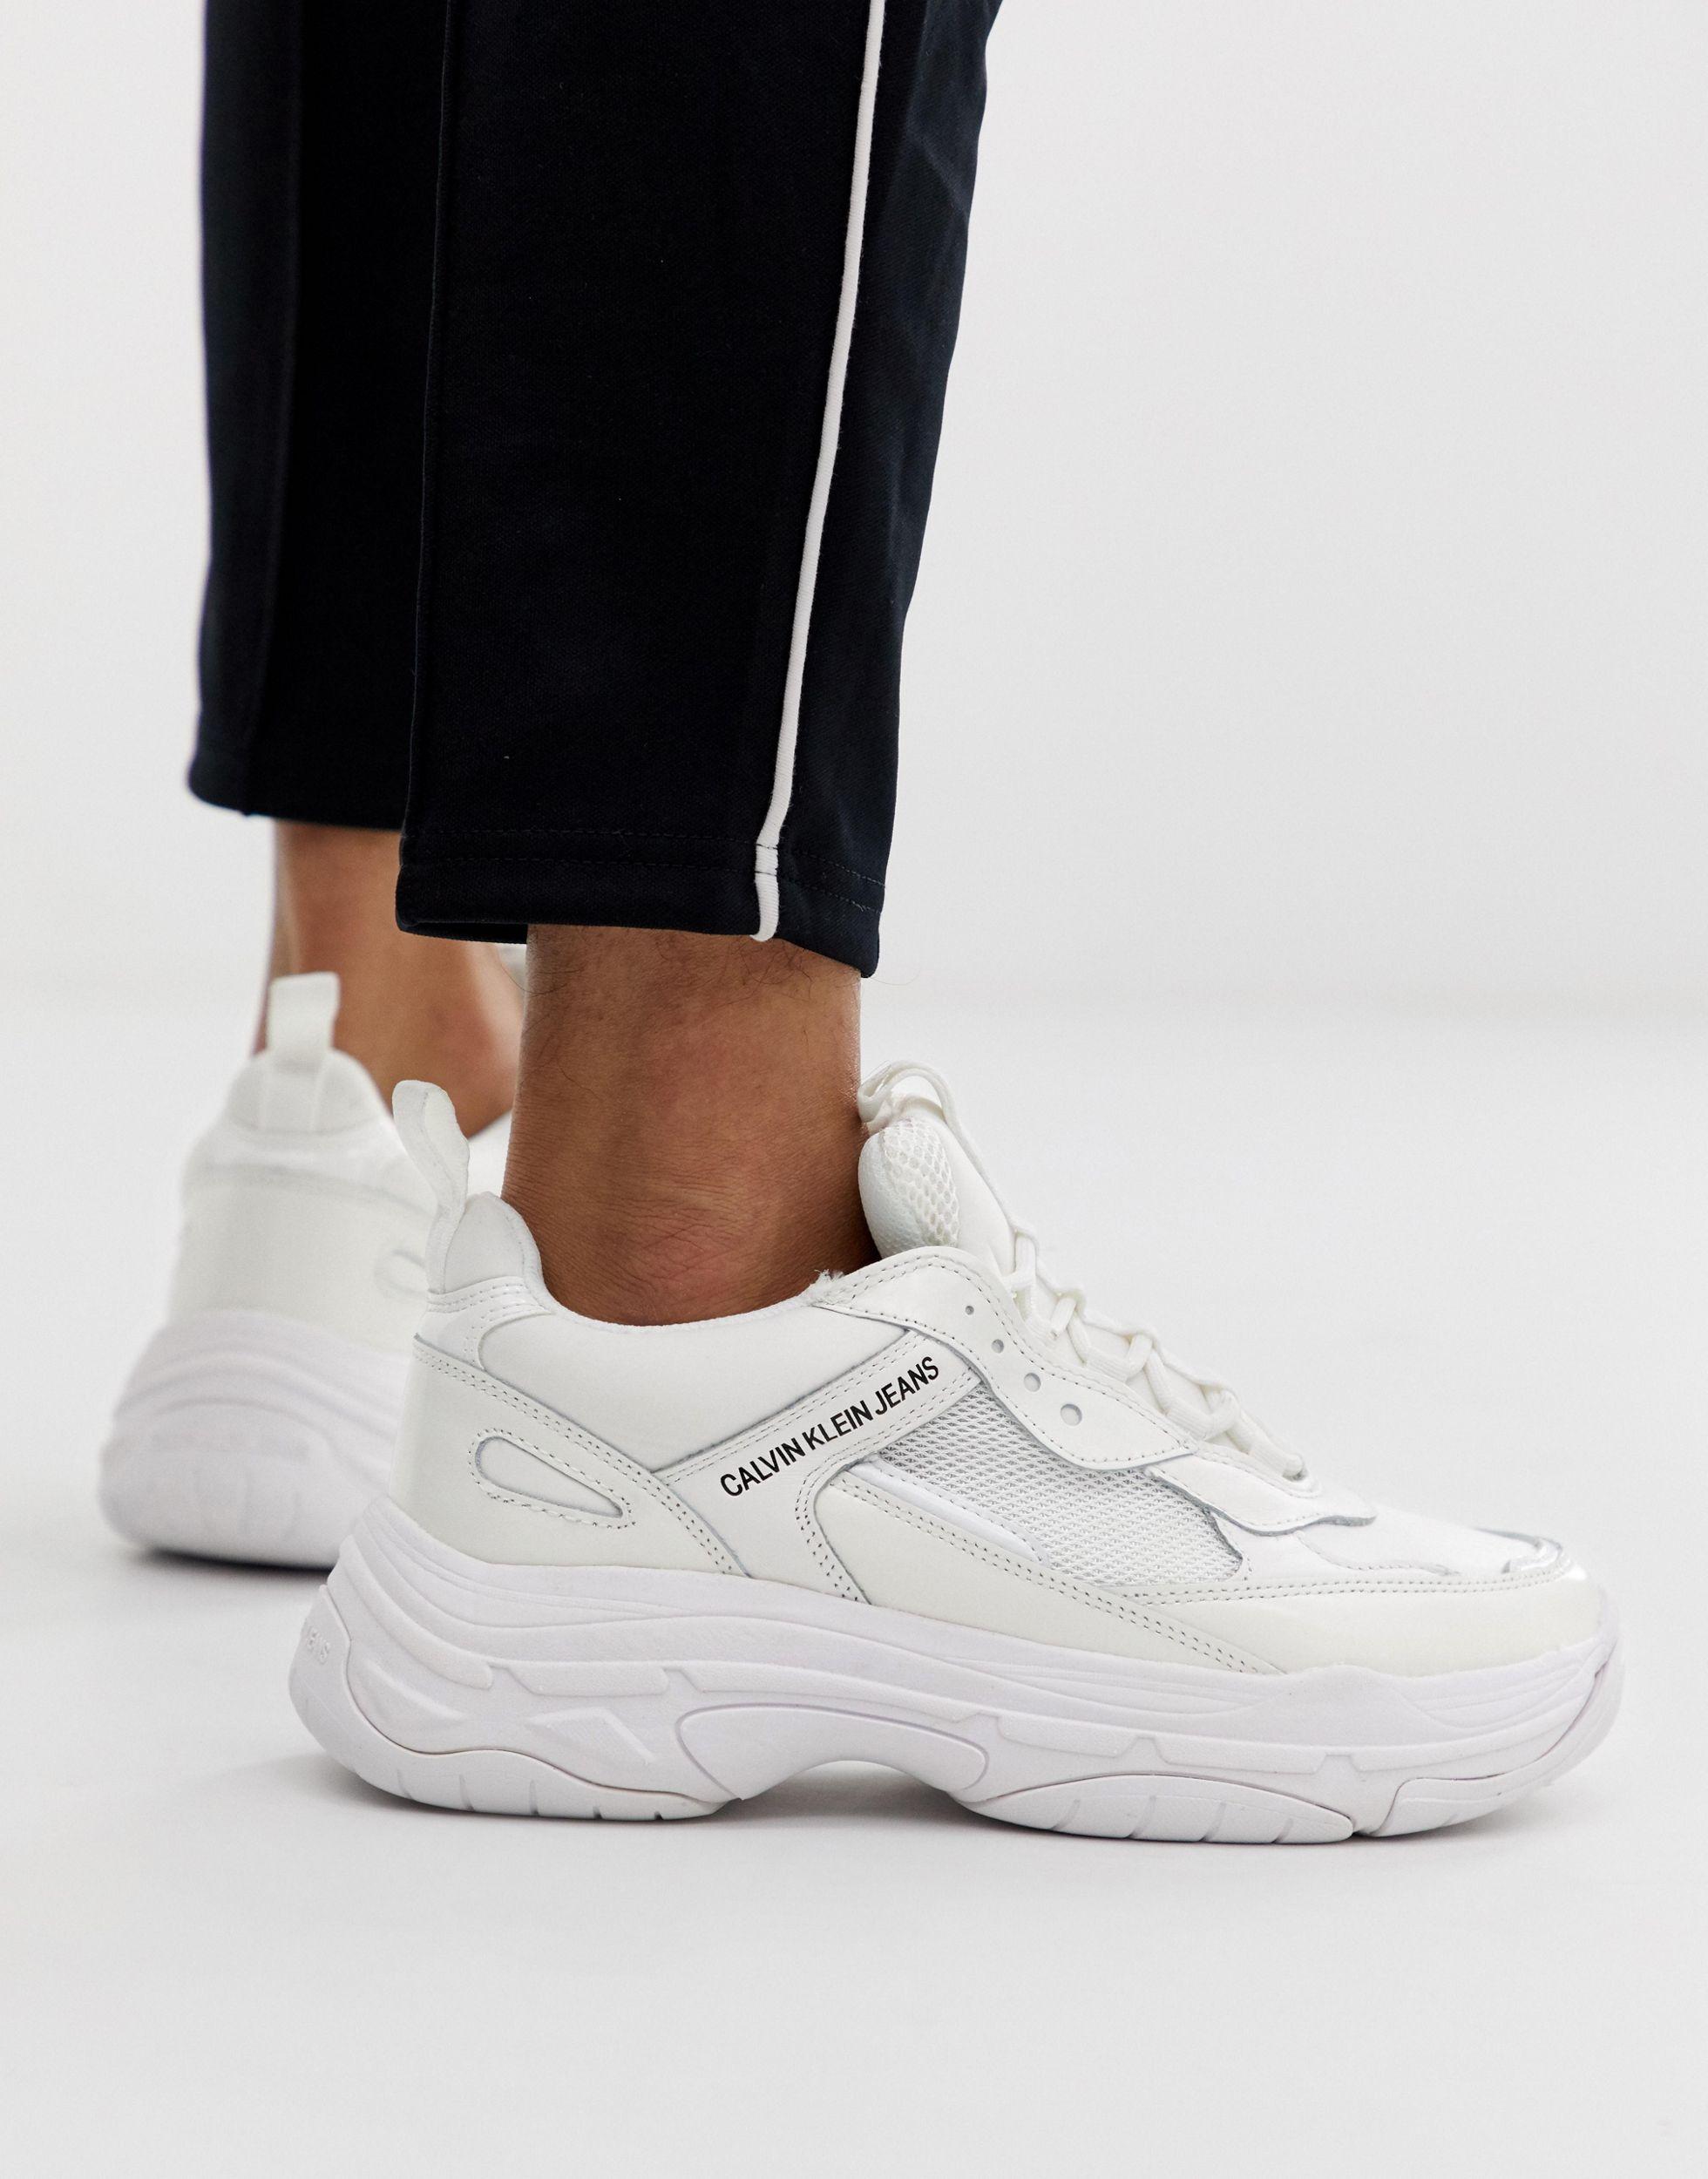 Calvin Klein Marvin Chunky Sole Trainers In White Hot Sale, SAVE 45% -  mpgc.net